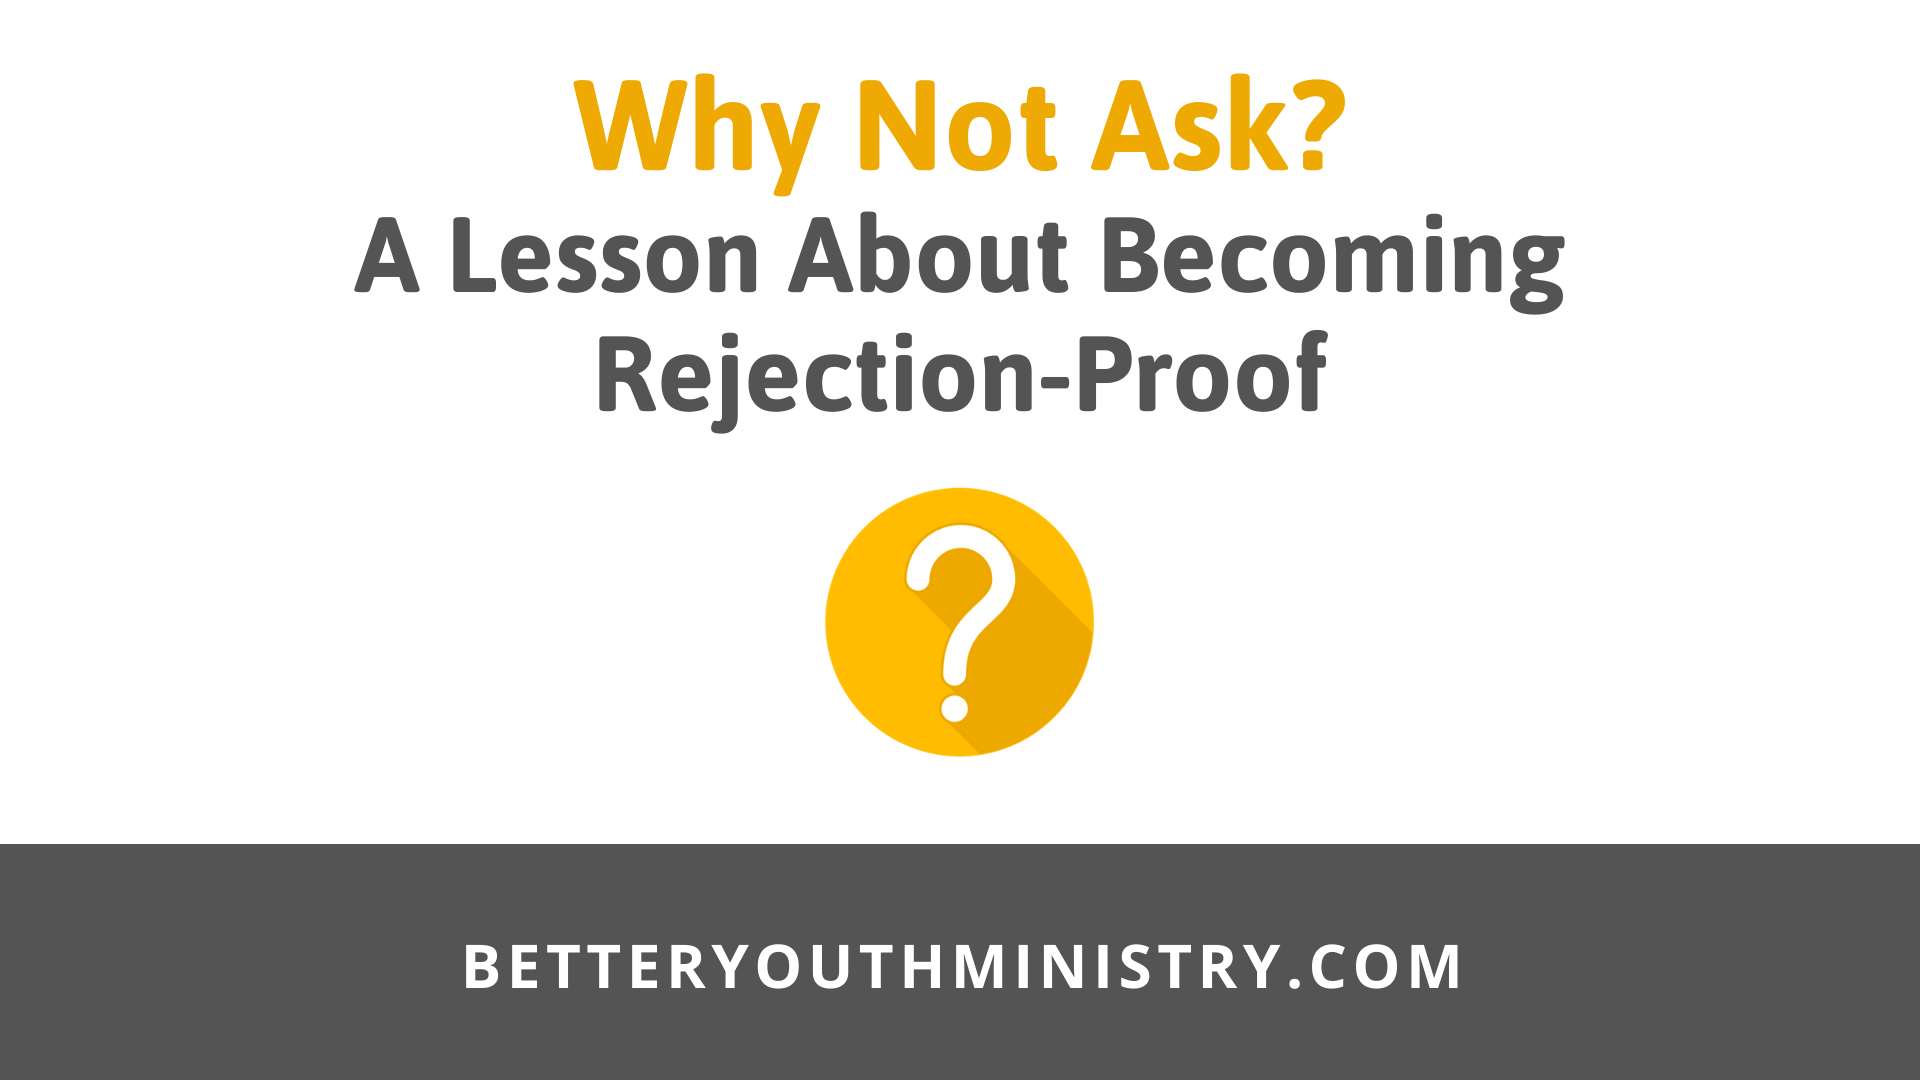 Why Not Ask? A Lesson About Becoming Rejection-Proof